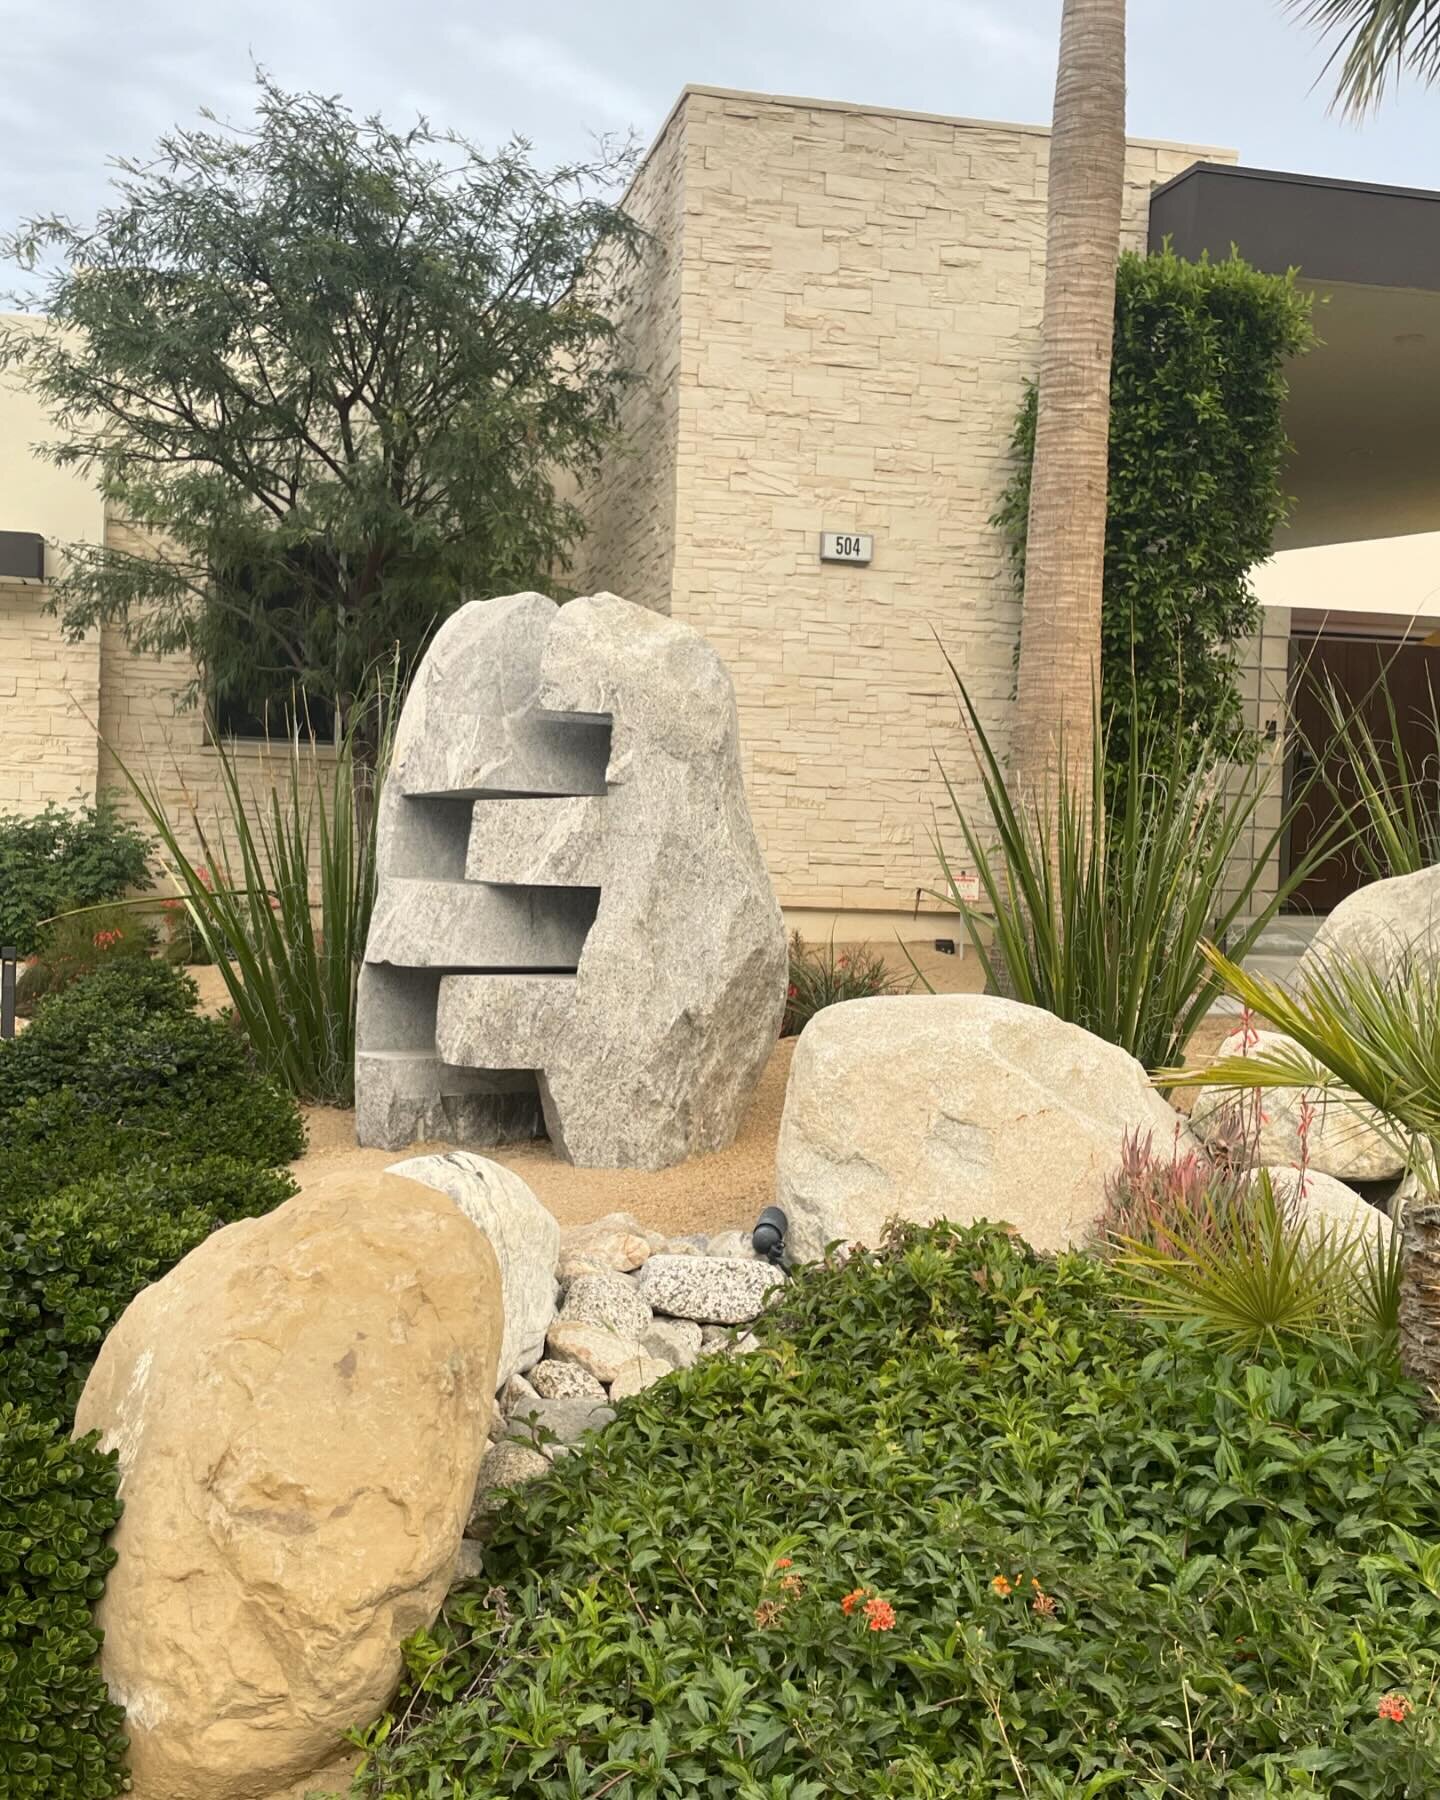 I&rsquo;ve admired the work of @rockartist1 for a long time and was excited to encounter two of his sculptures unexpectedly on a walk. 

#stonesculpture 
#palmspringsarchitecture